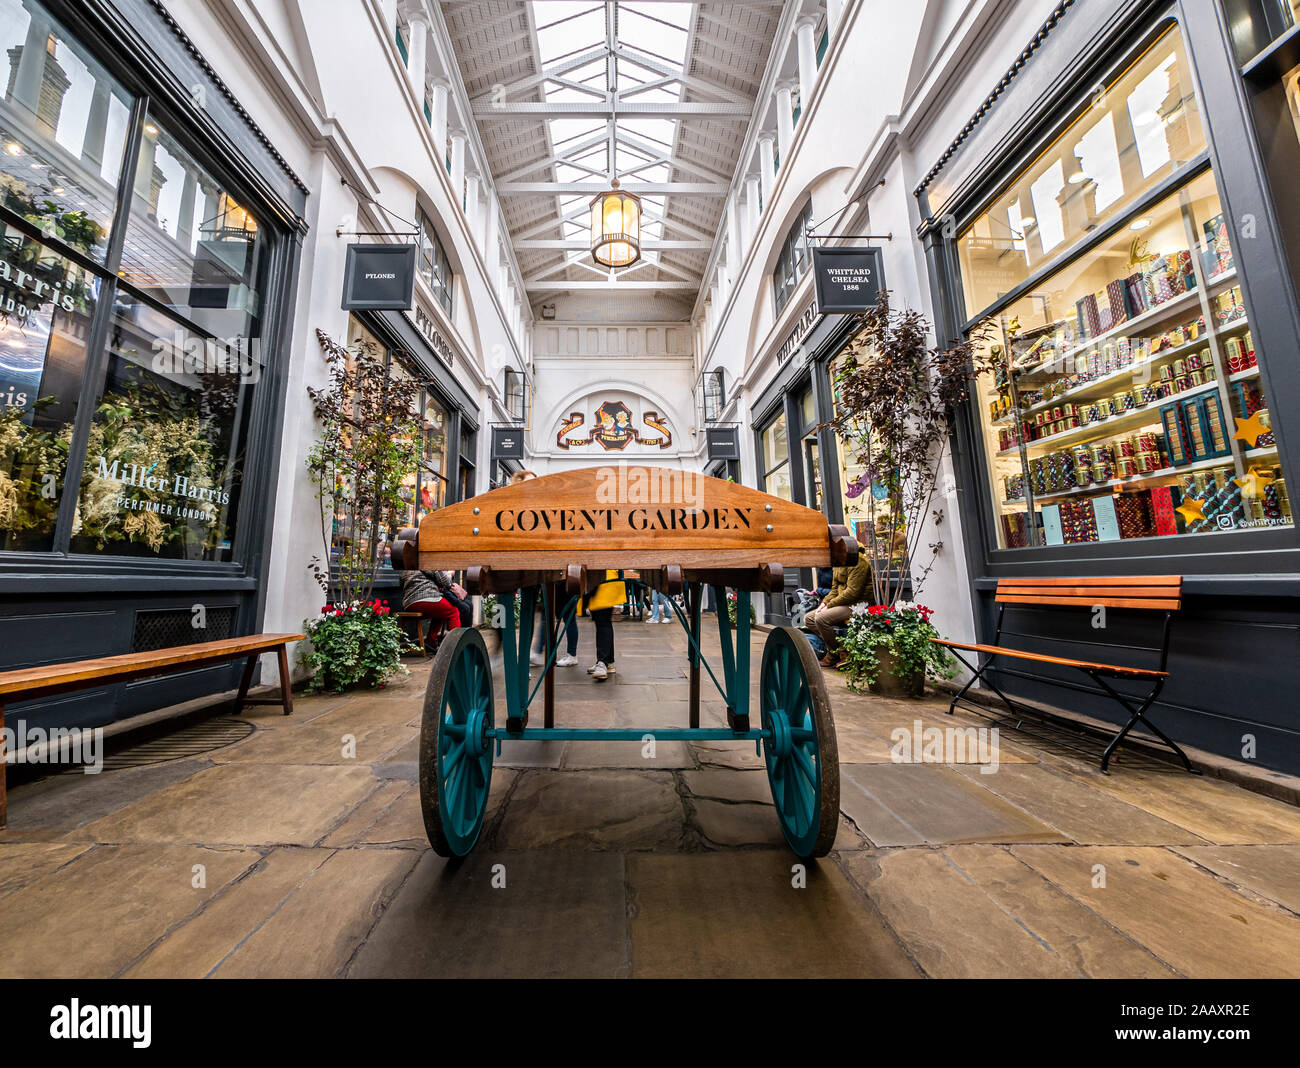 London, England, UK -  November 15, 2019: Vintage horse carriage in the old town square hall of Covent Garden in winter Christmas holiday Stock Photo